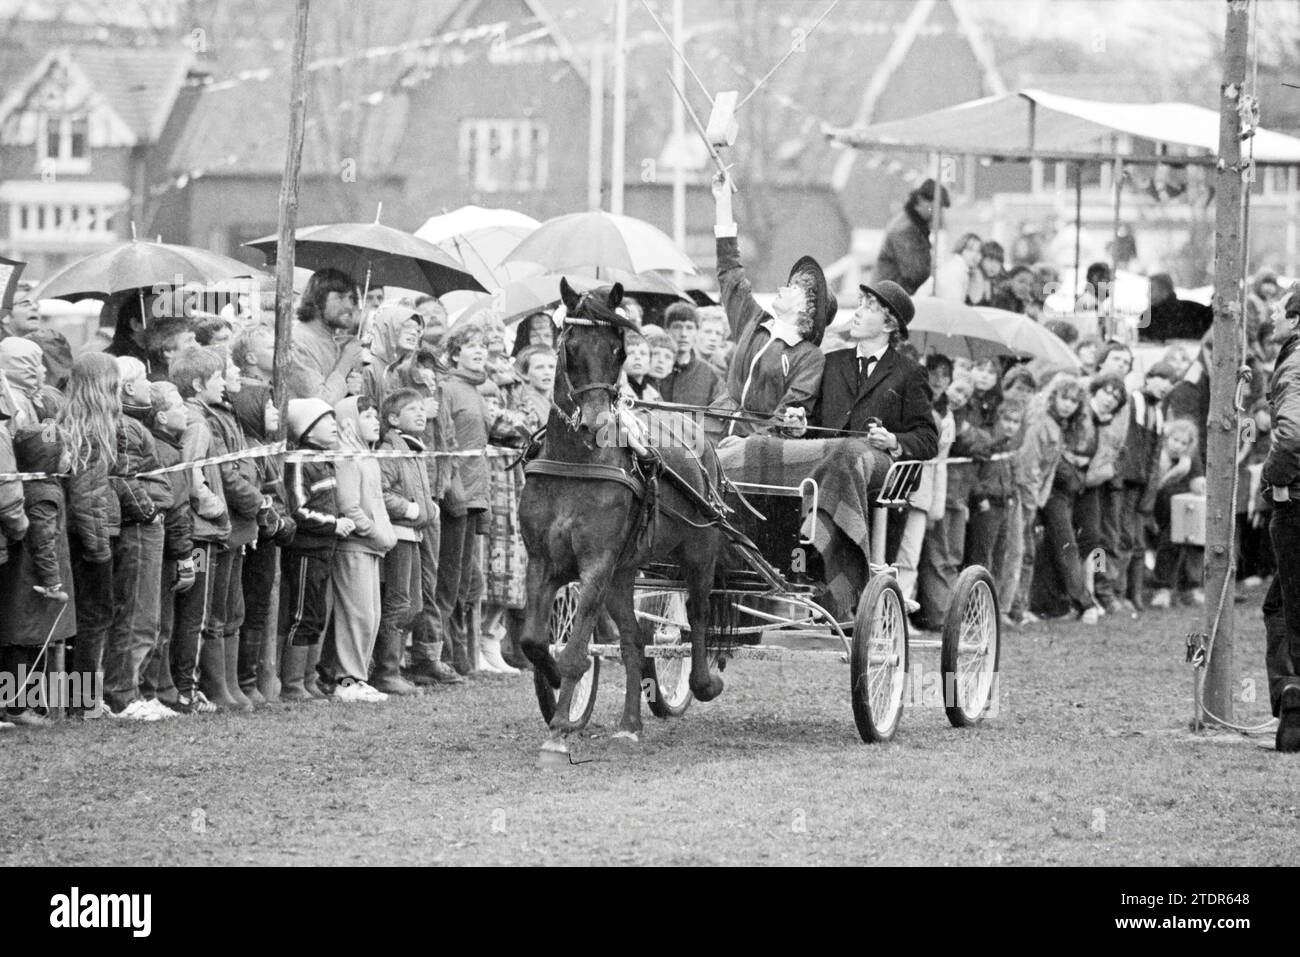 Ring stitching, harnessed horses, B'broek, Queen's Day, Bennebroek, 30-04-1982, Whizgle News from the Past, Tailored for the Future. Explore historical narratives, Dutch The Netherlands agency image with a modern perspective, bridging the gap between yesterday's events and tomorrow's insights. A timeless journey shaping the stories that shape our future Stock Photo